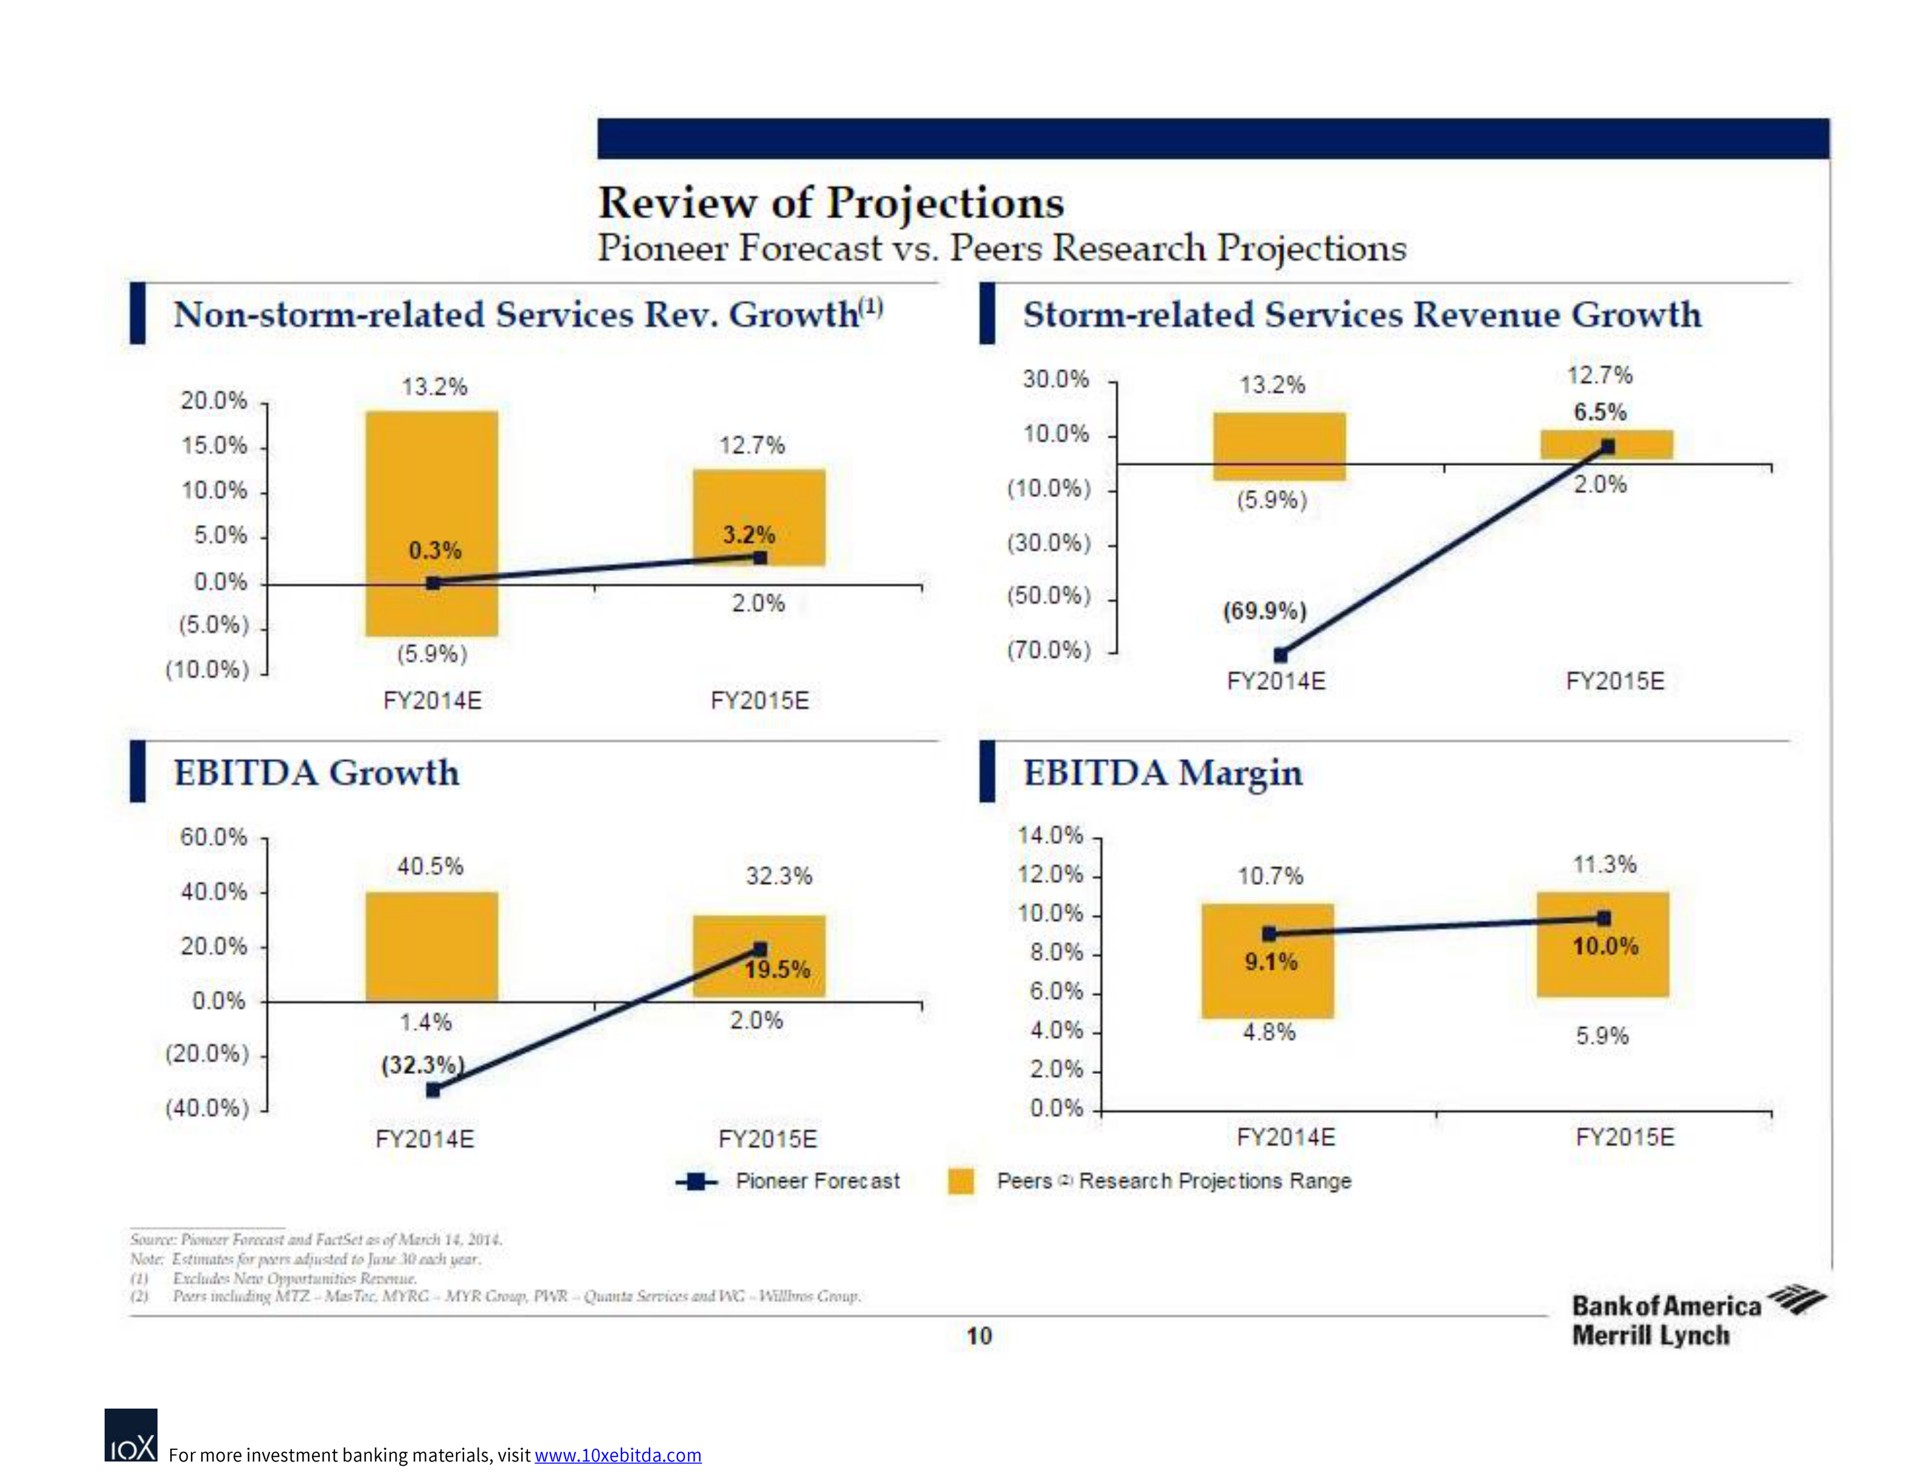 review of projections pioneer forecast peers research projections non storm related services rev growth growth margin | Bank of America